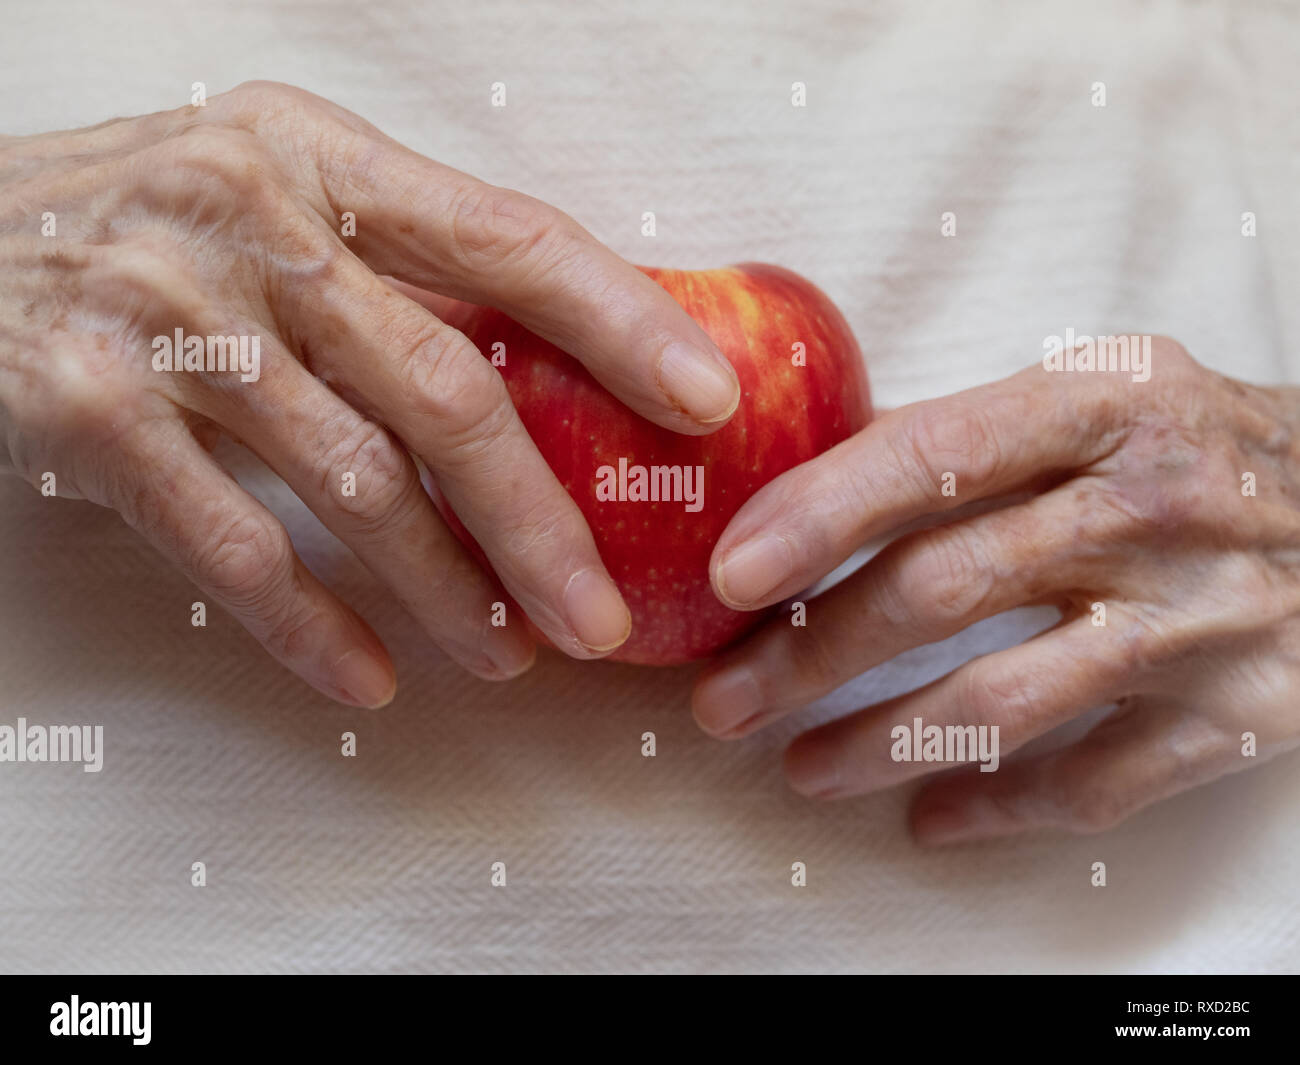 Elderly white woman's hands holding an organic red apple against an off white background. Shallow depth of field. Stock Photo